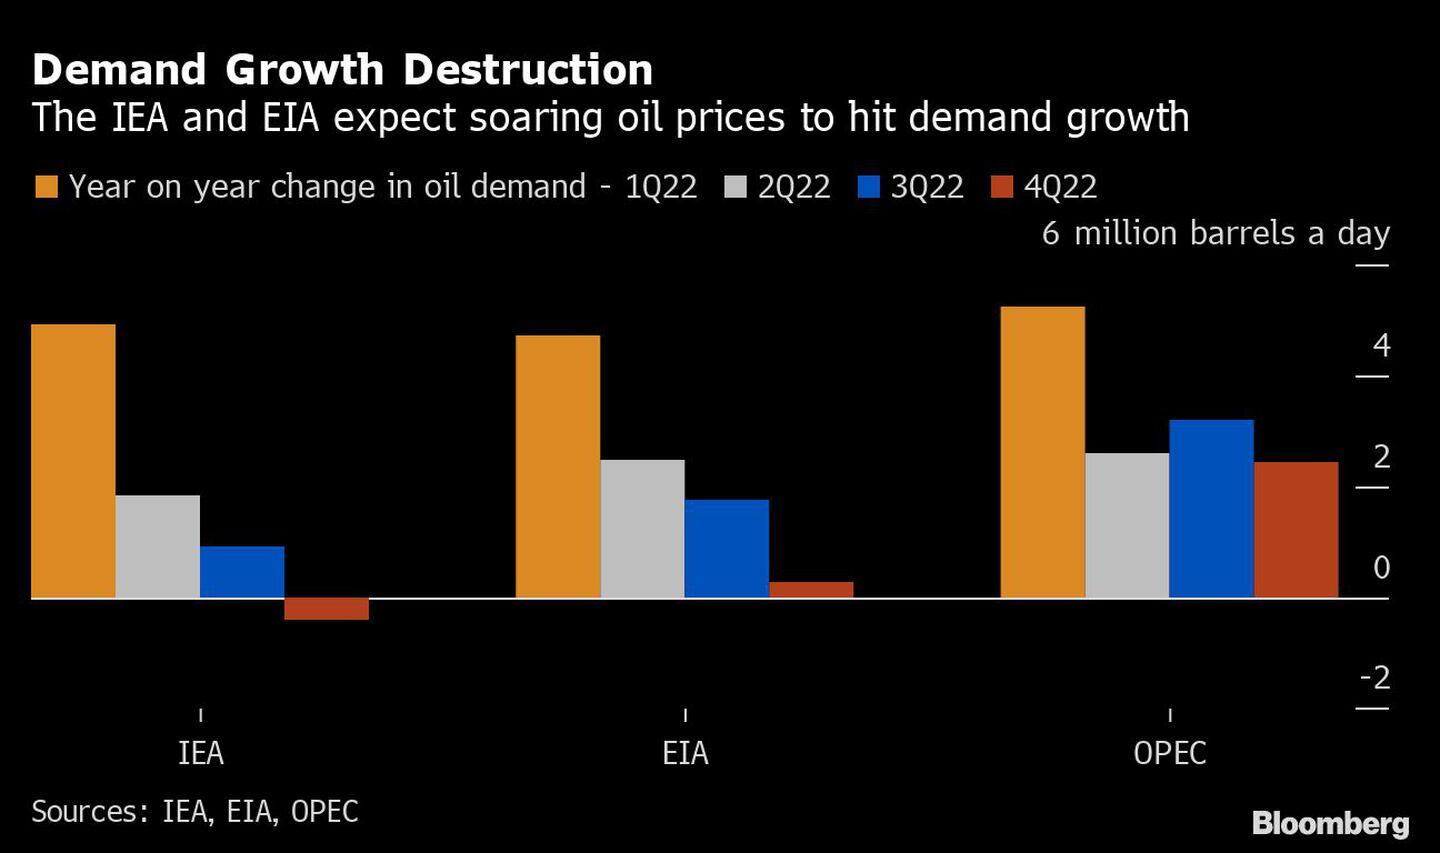 Demand Growth Destruction | The IEA and EIA expect soaring oil prices to hit demand growthdfd